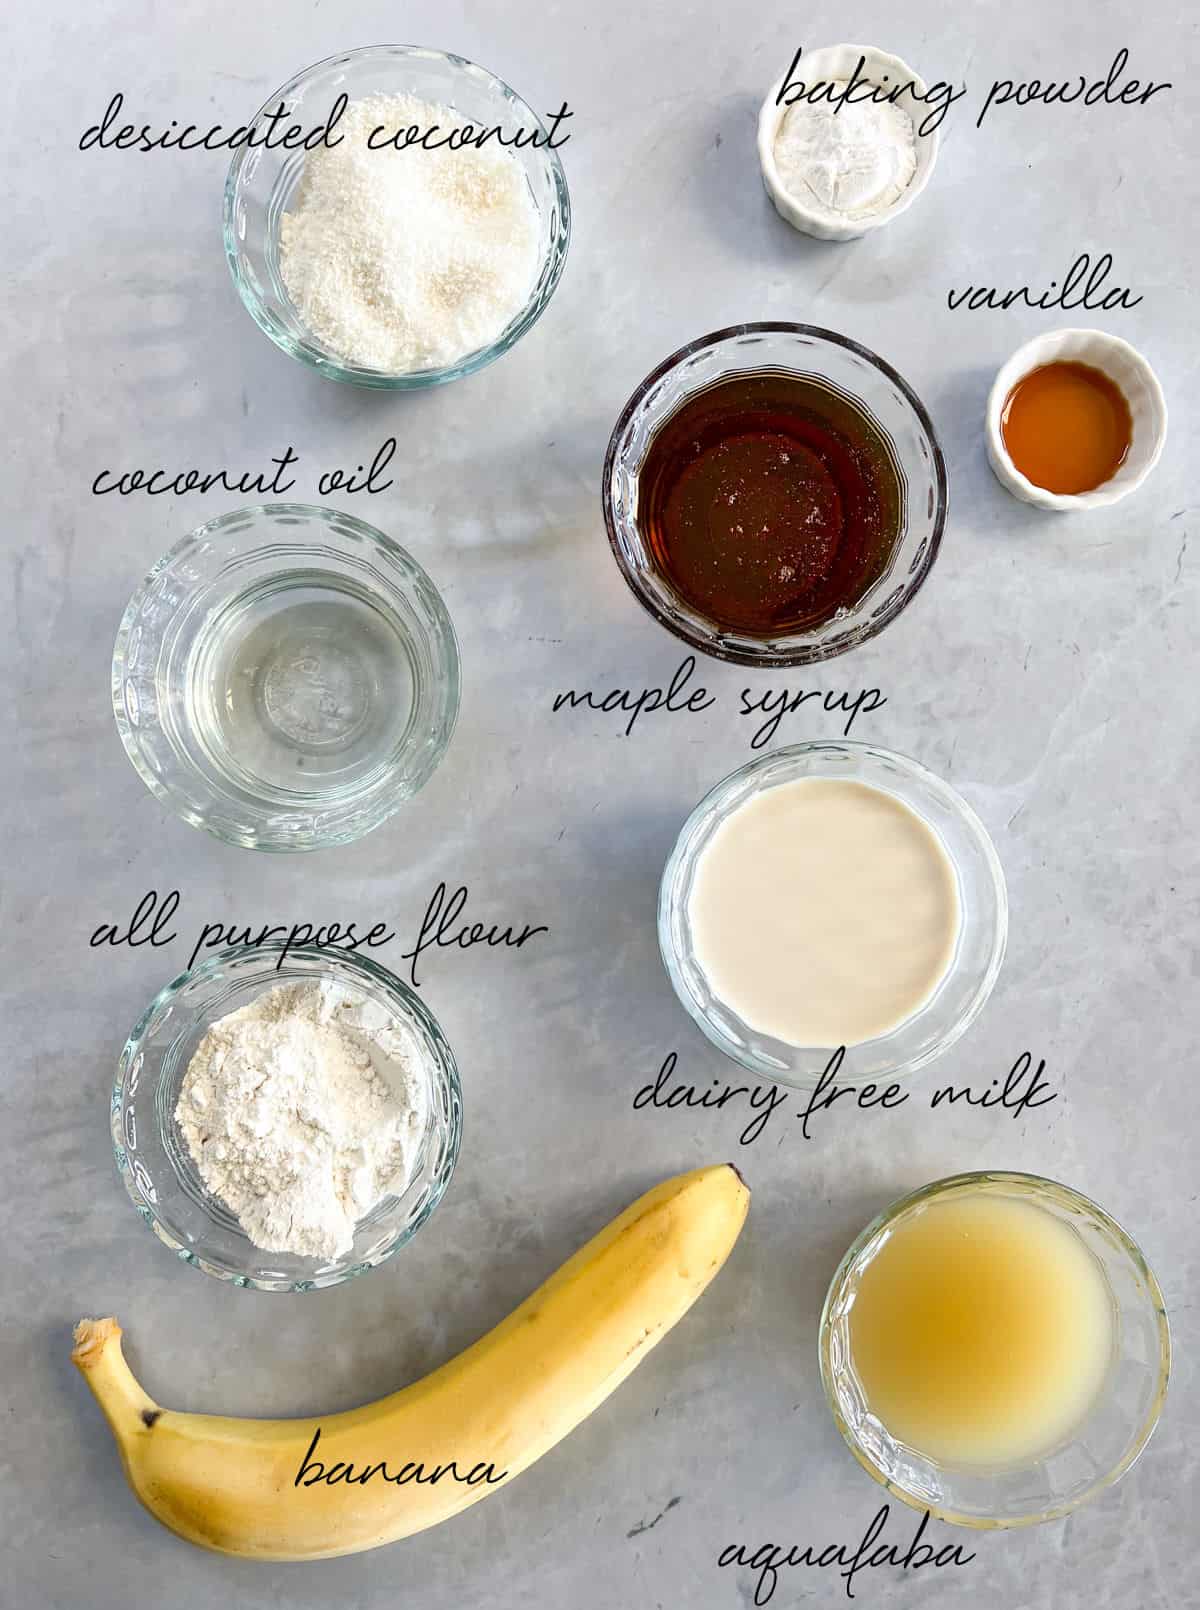 flours, milk, clear oil, a banana, yellowish liquid in bowls laid out on a grey bench